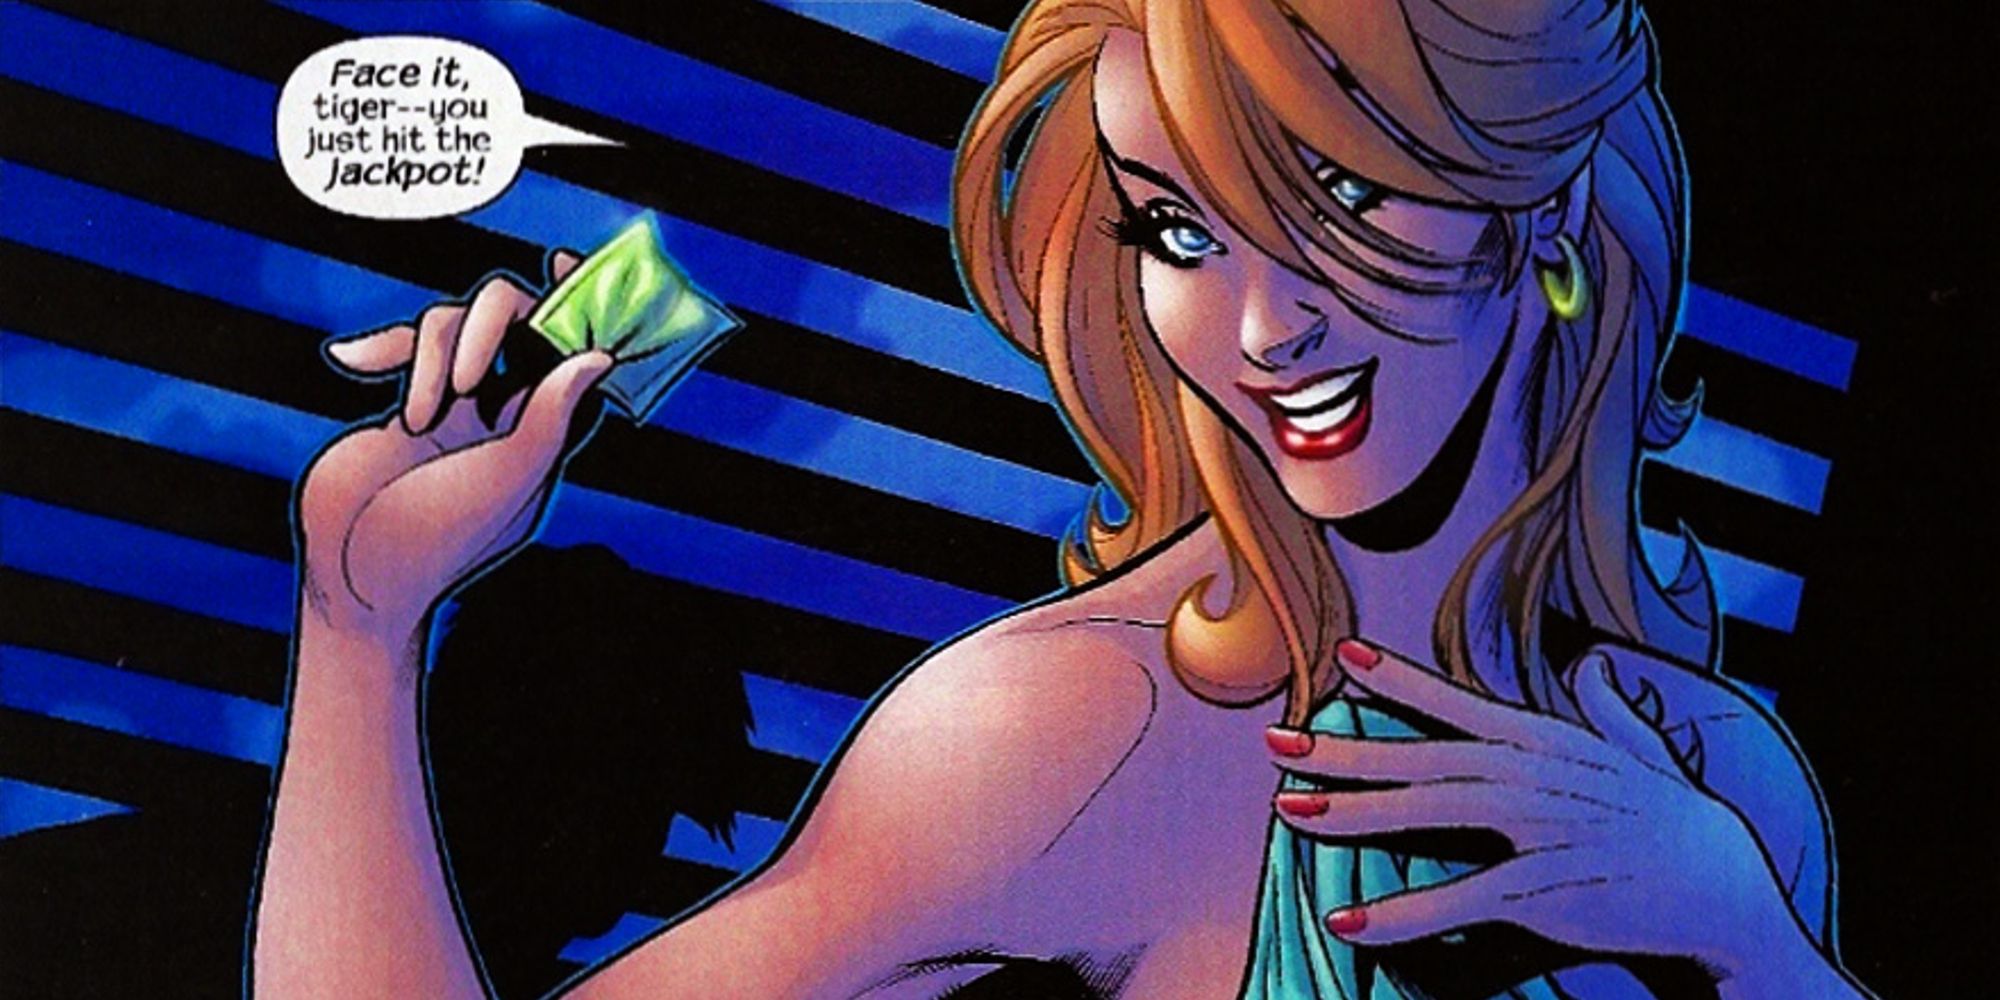 May Parker holding a condom in Mark Millar's Trouble (2003)